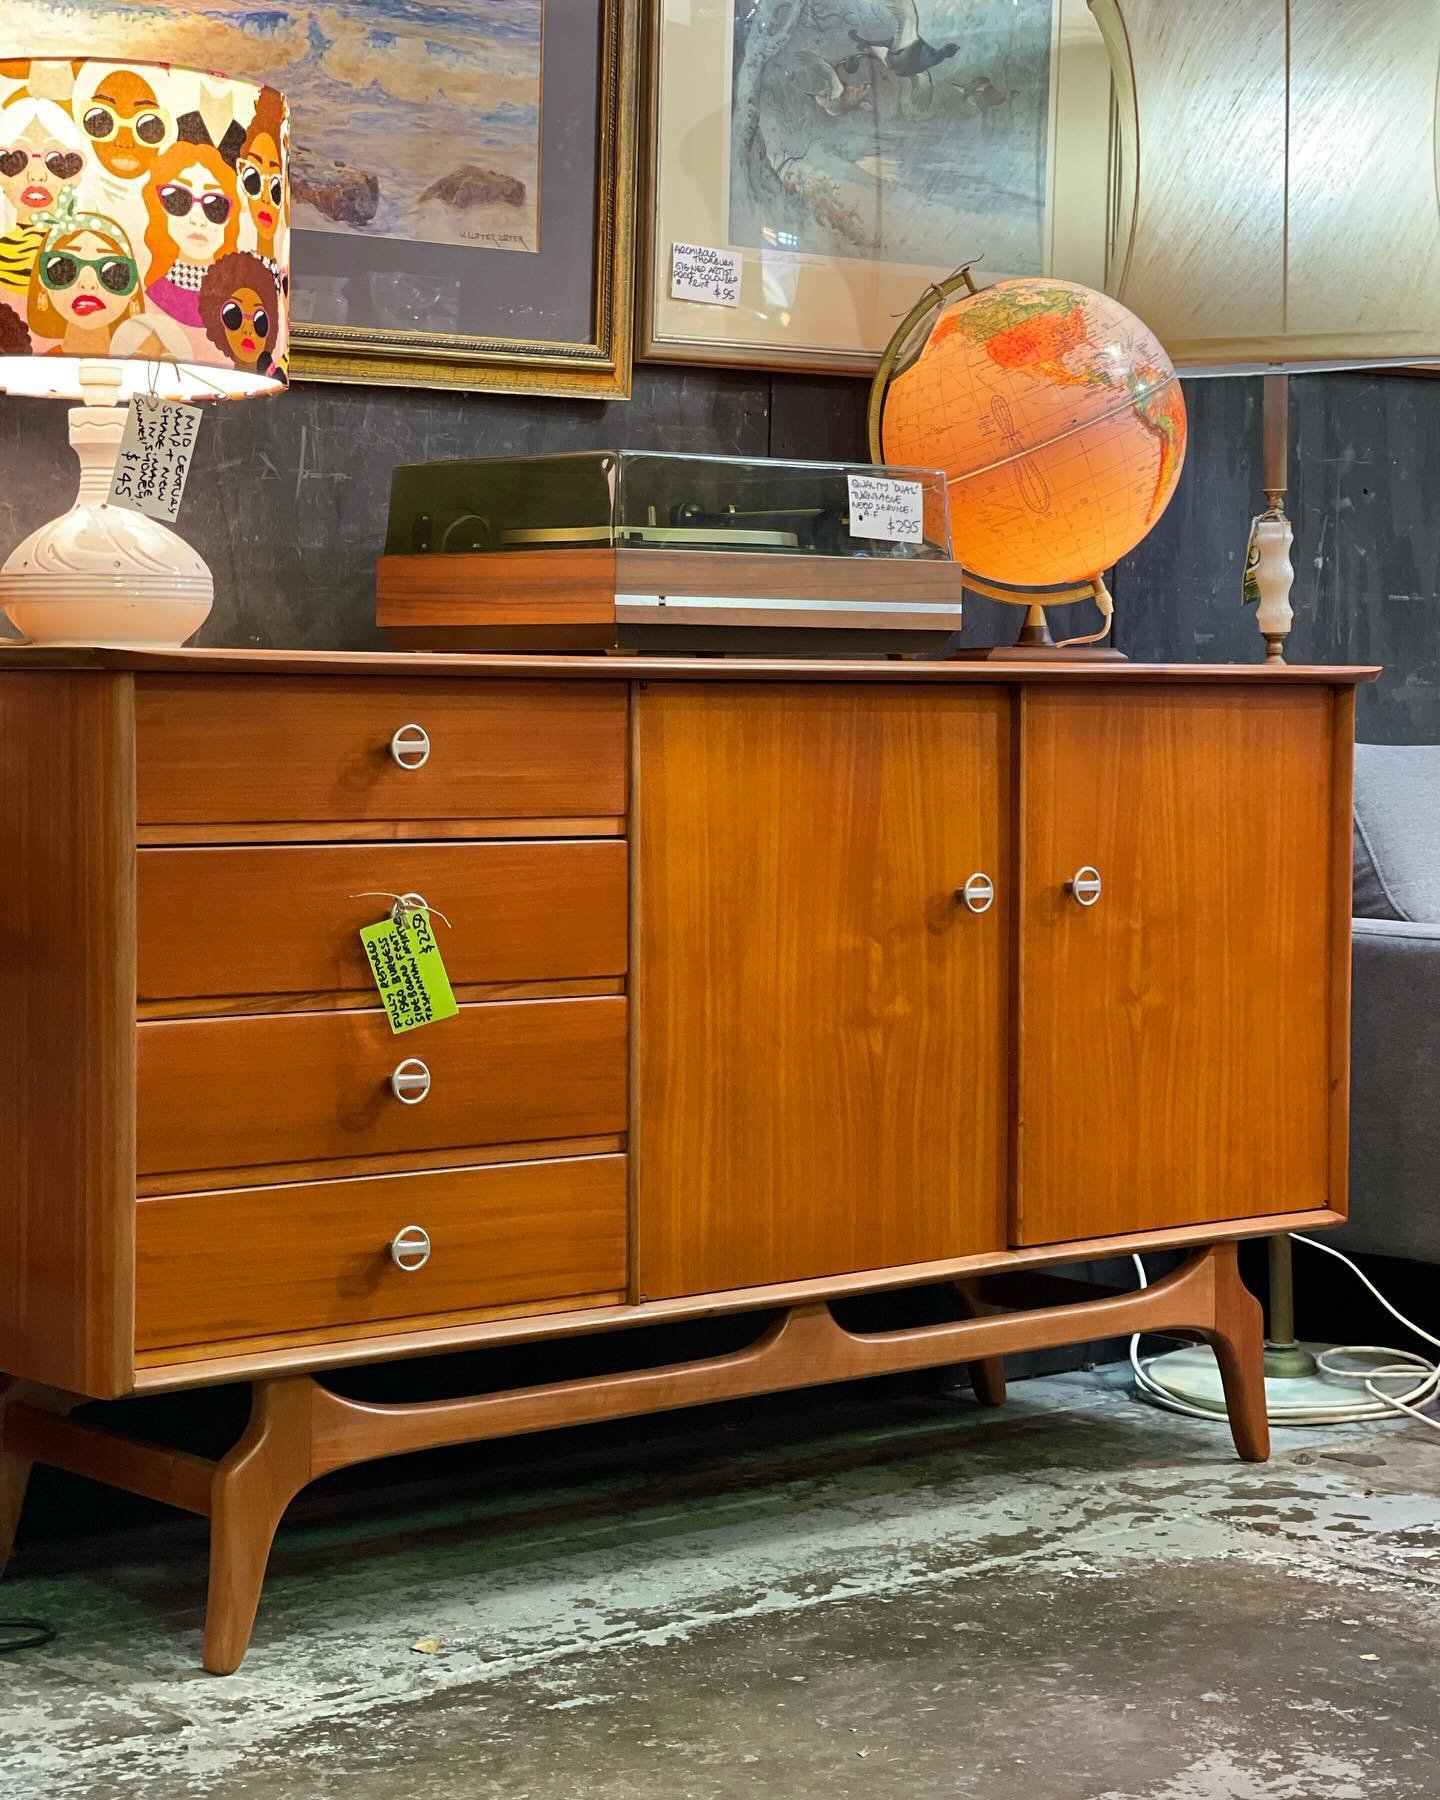 Happy Friday!!! Feast your eyes on these vintage delights!! As always call us if you have any questions or would like to purchase something!! Open 10am-6pm..

0418160737

#midcentury #retro #retrohome #vintagefashion #shopsustainably #alexandria #syd